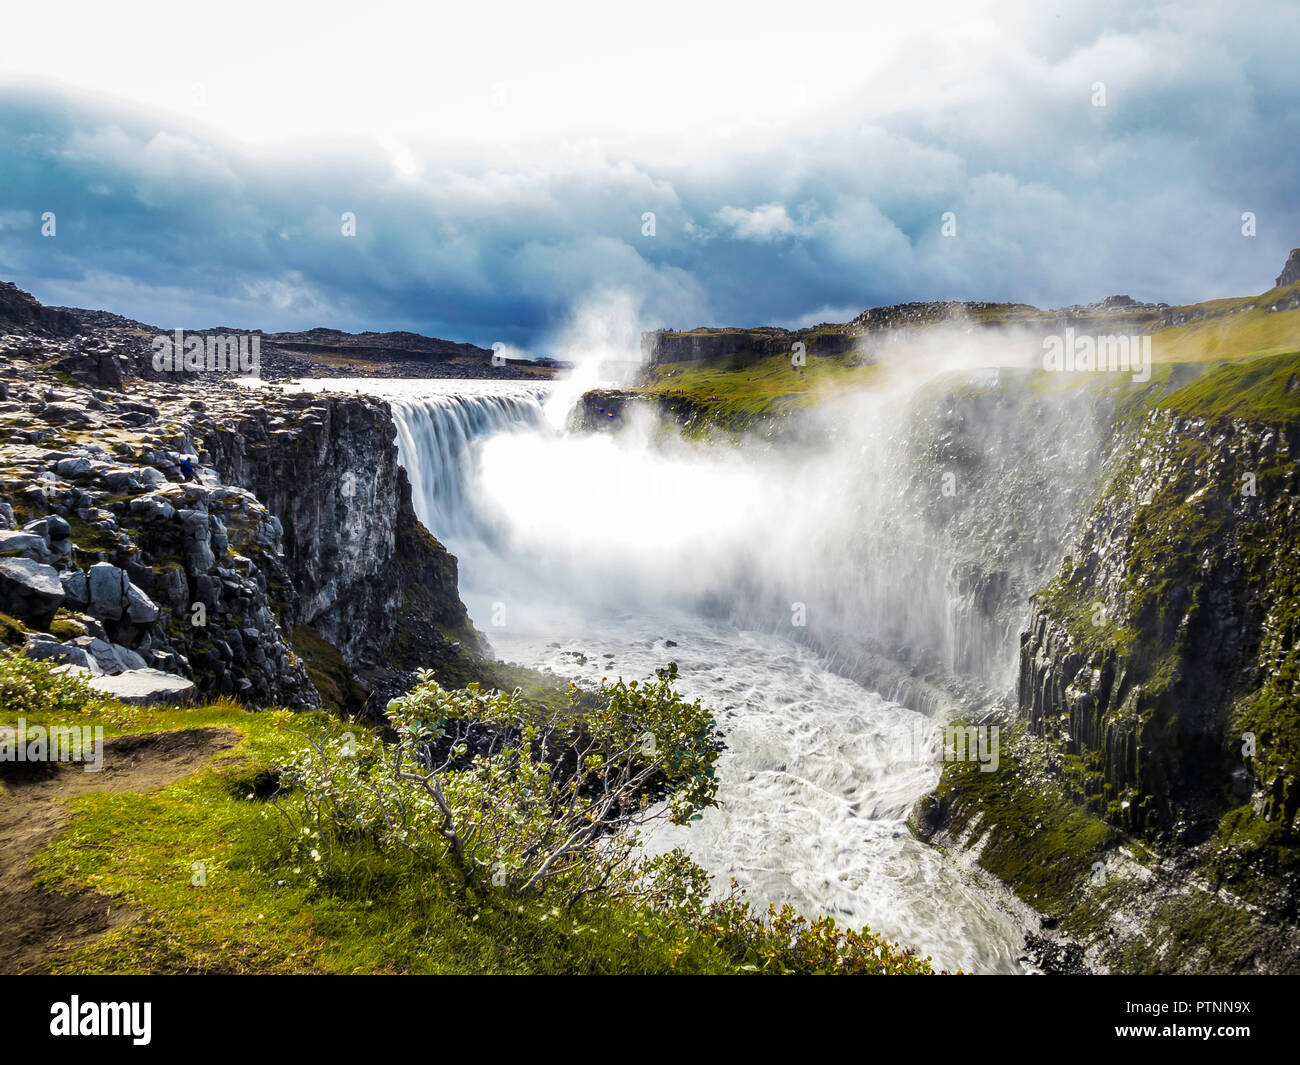 Dramatic scenery at Selfoss waterfall in Northern Iceland Stock Photo